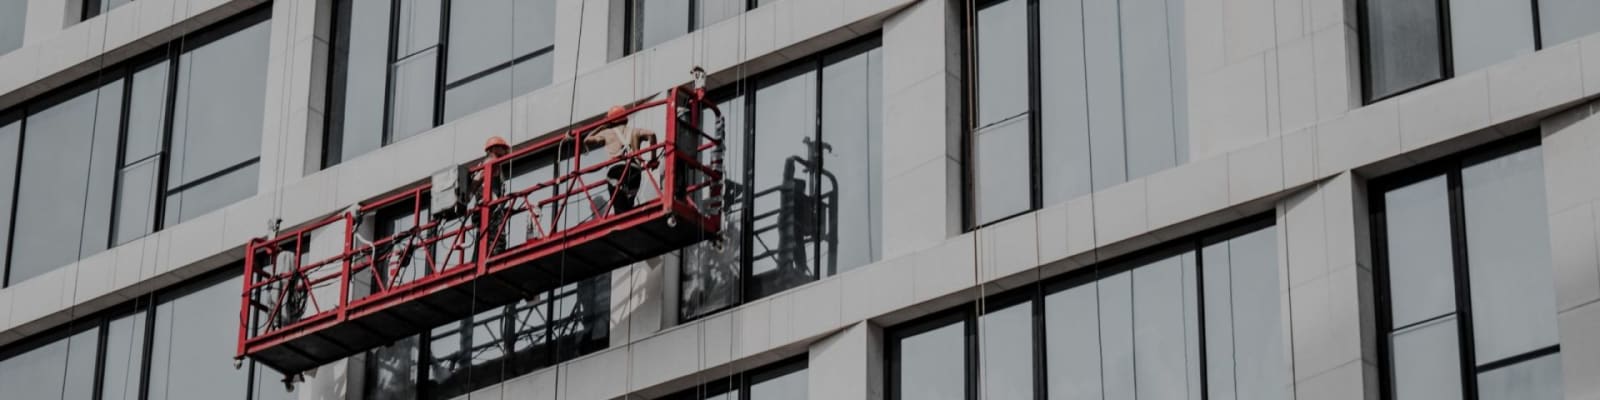 window cleaning services pros in Phoenix